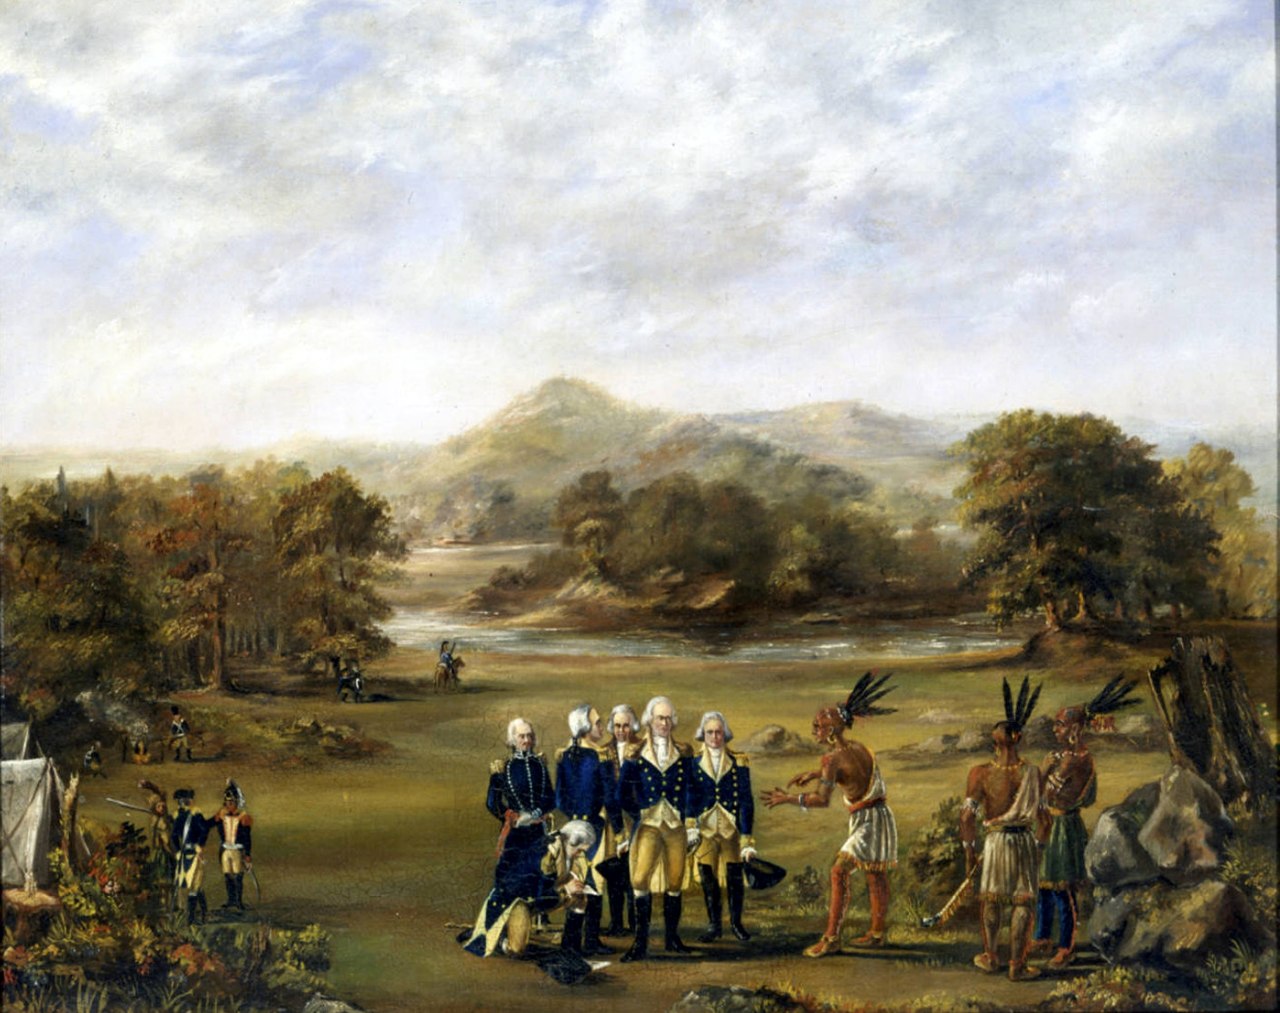 This depiction of the Treaty of Greenville negotiations may have been painted by one of Anthony Wayne's officers. (Public domain)